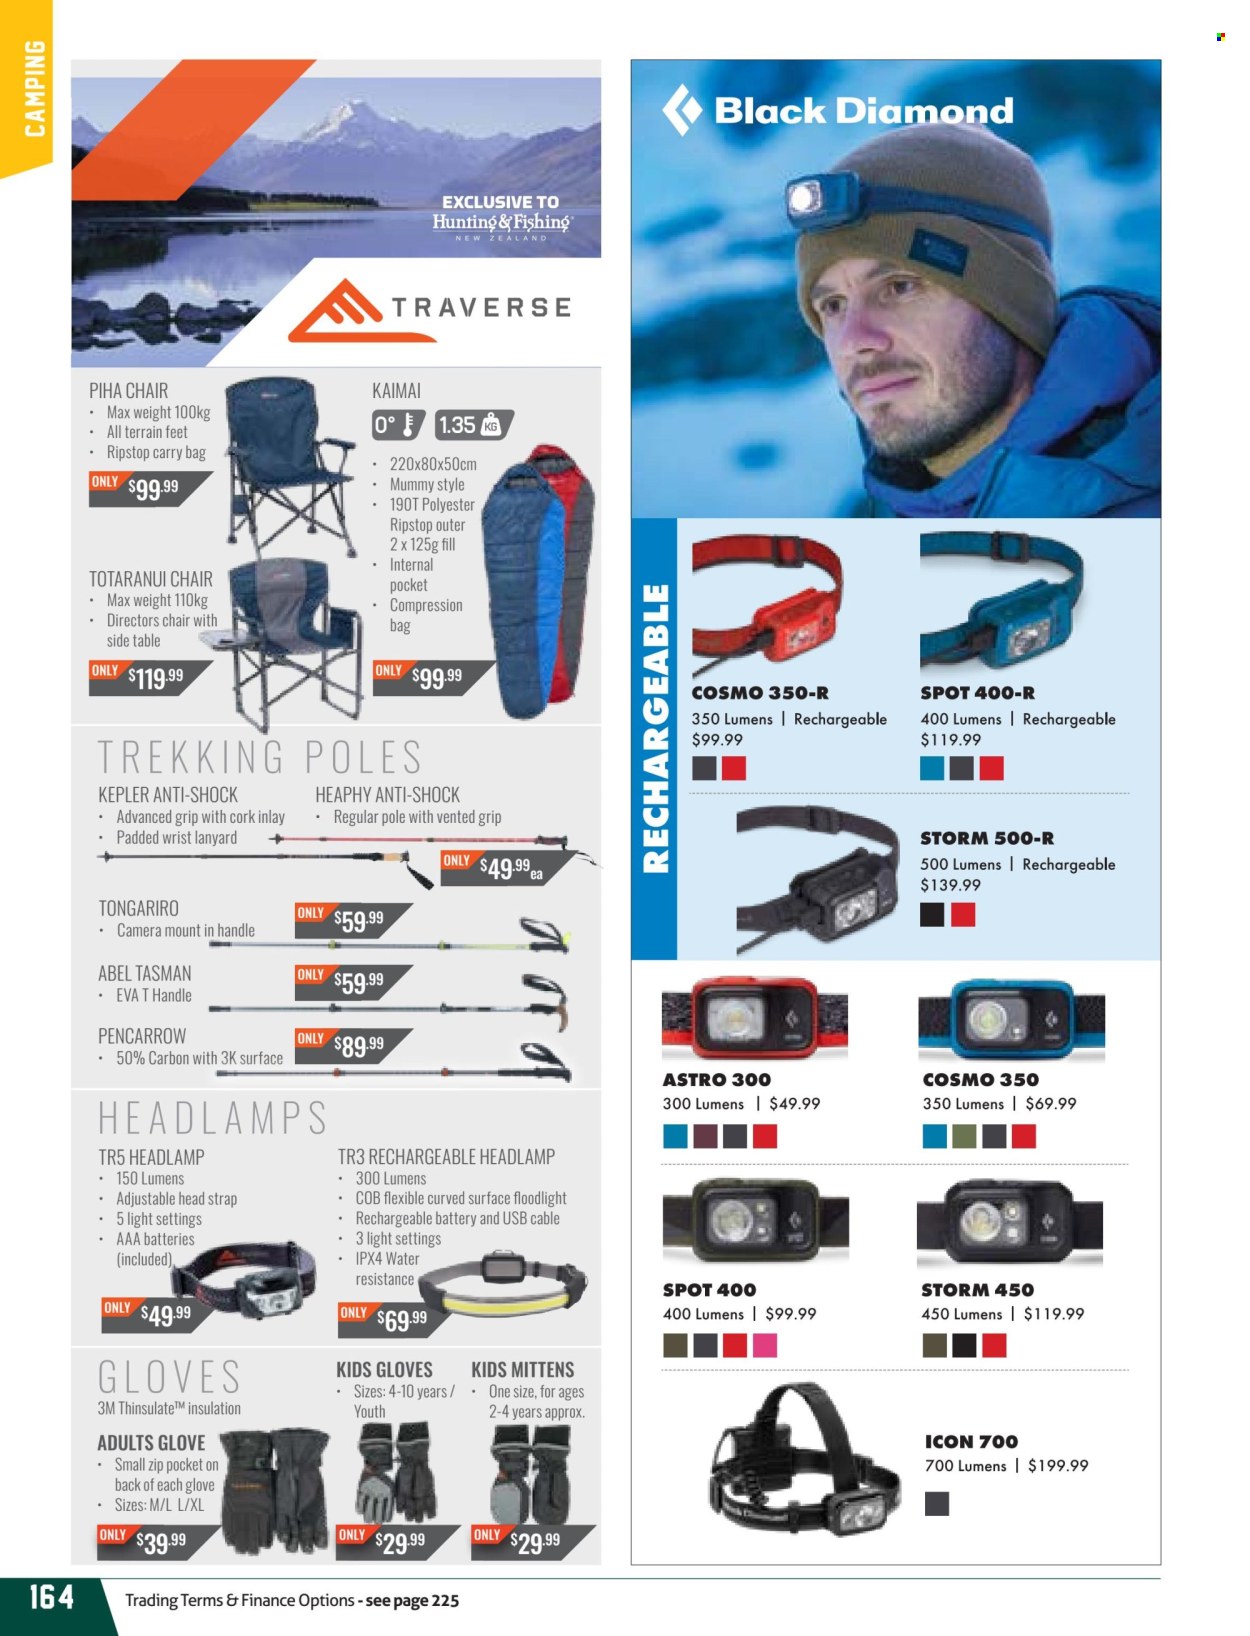 thumbnail - Hunting & Fishing mailer - Sales products - camera, chair, gloves, headlamp. Page 164.